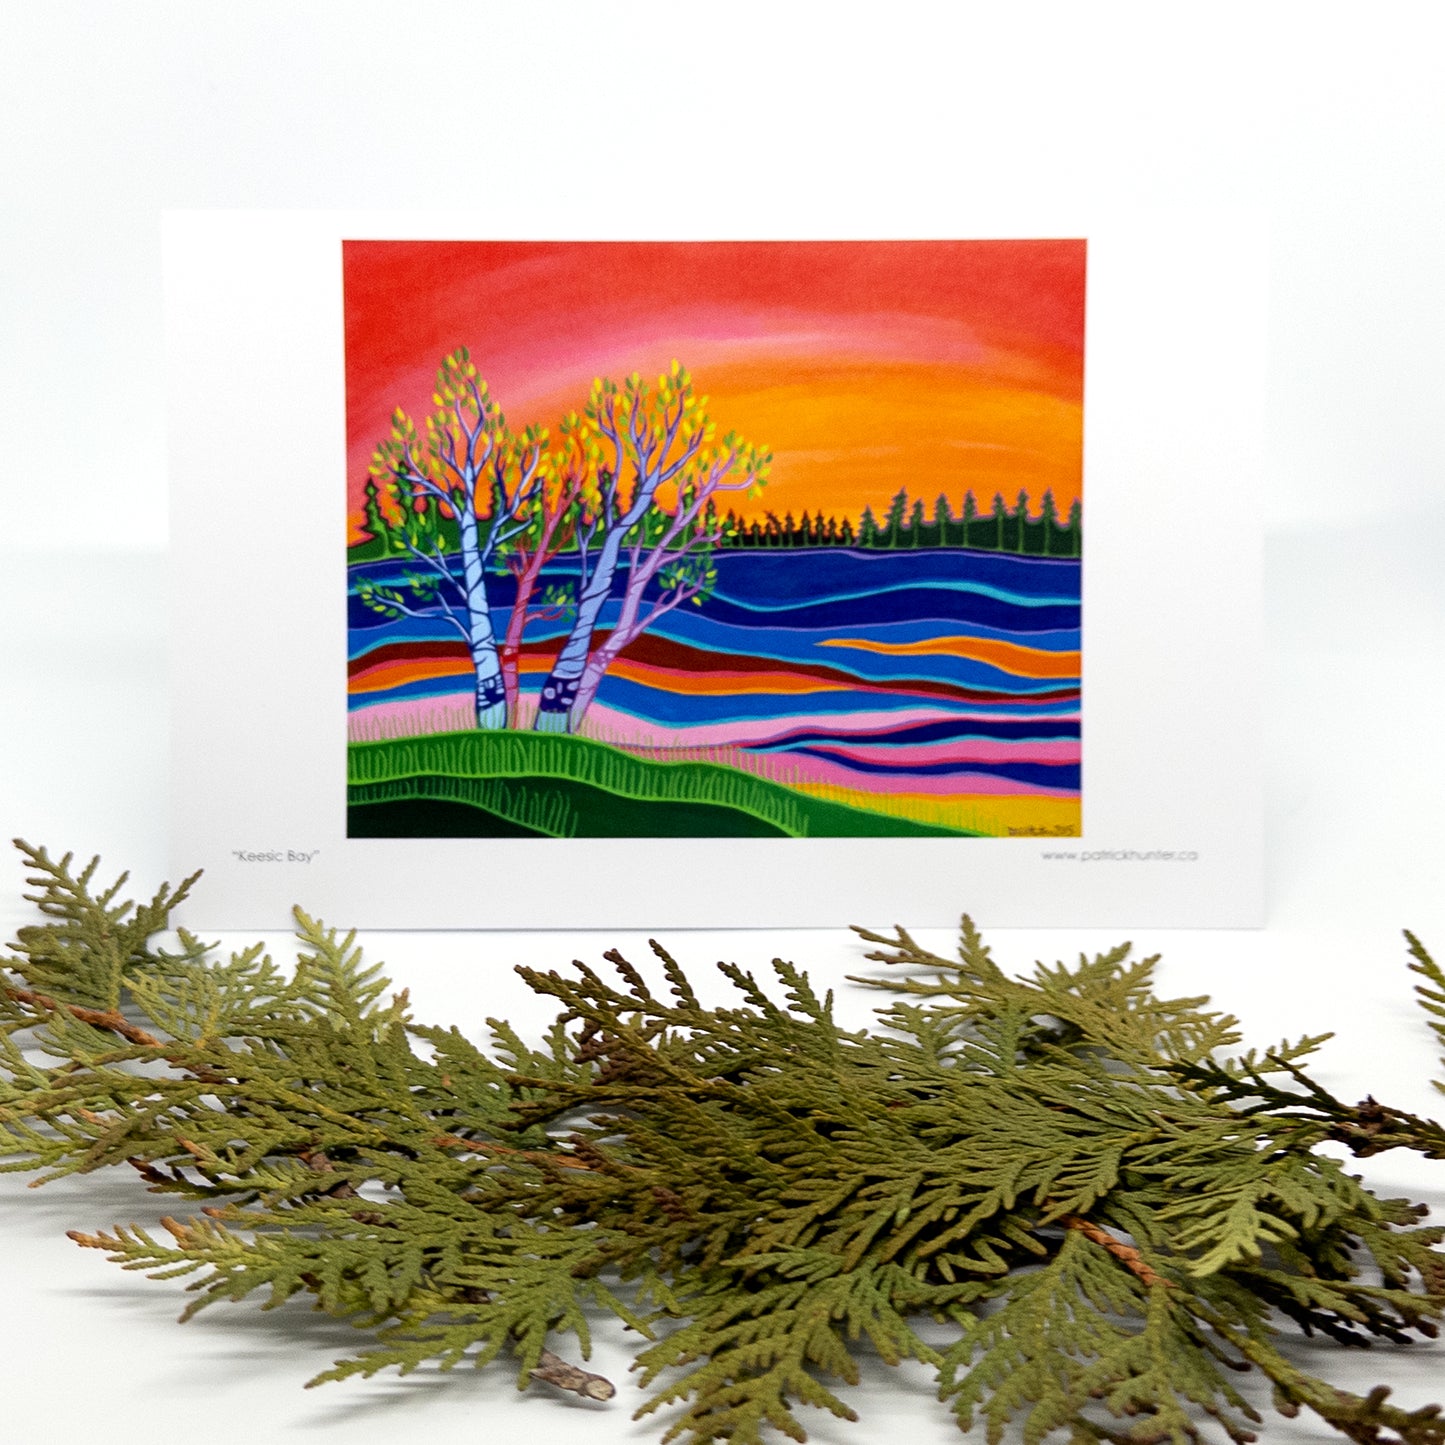 Patrick's painting of Keesic Bay in woodland art style as a greeting card standing behind some cedar boughs that lay flat.